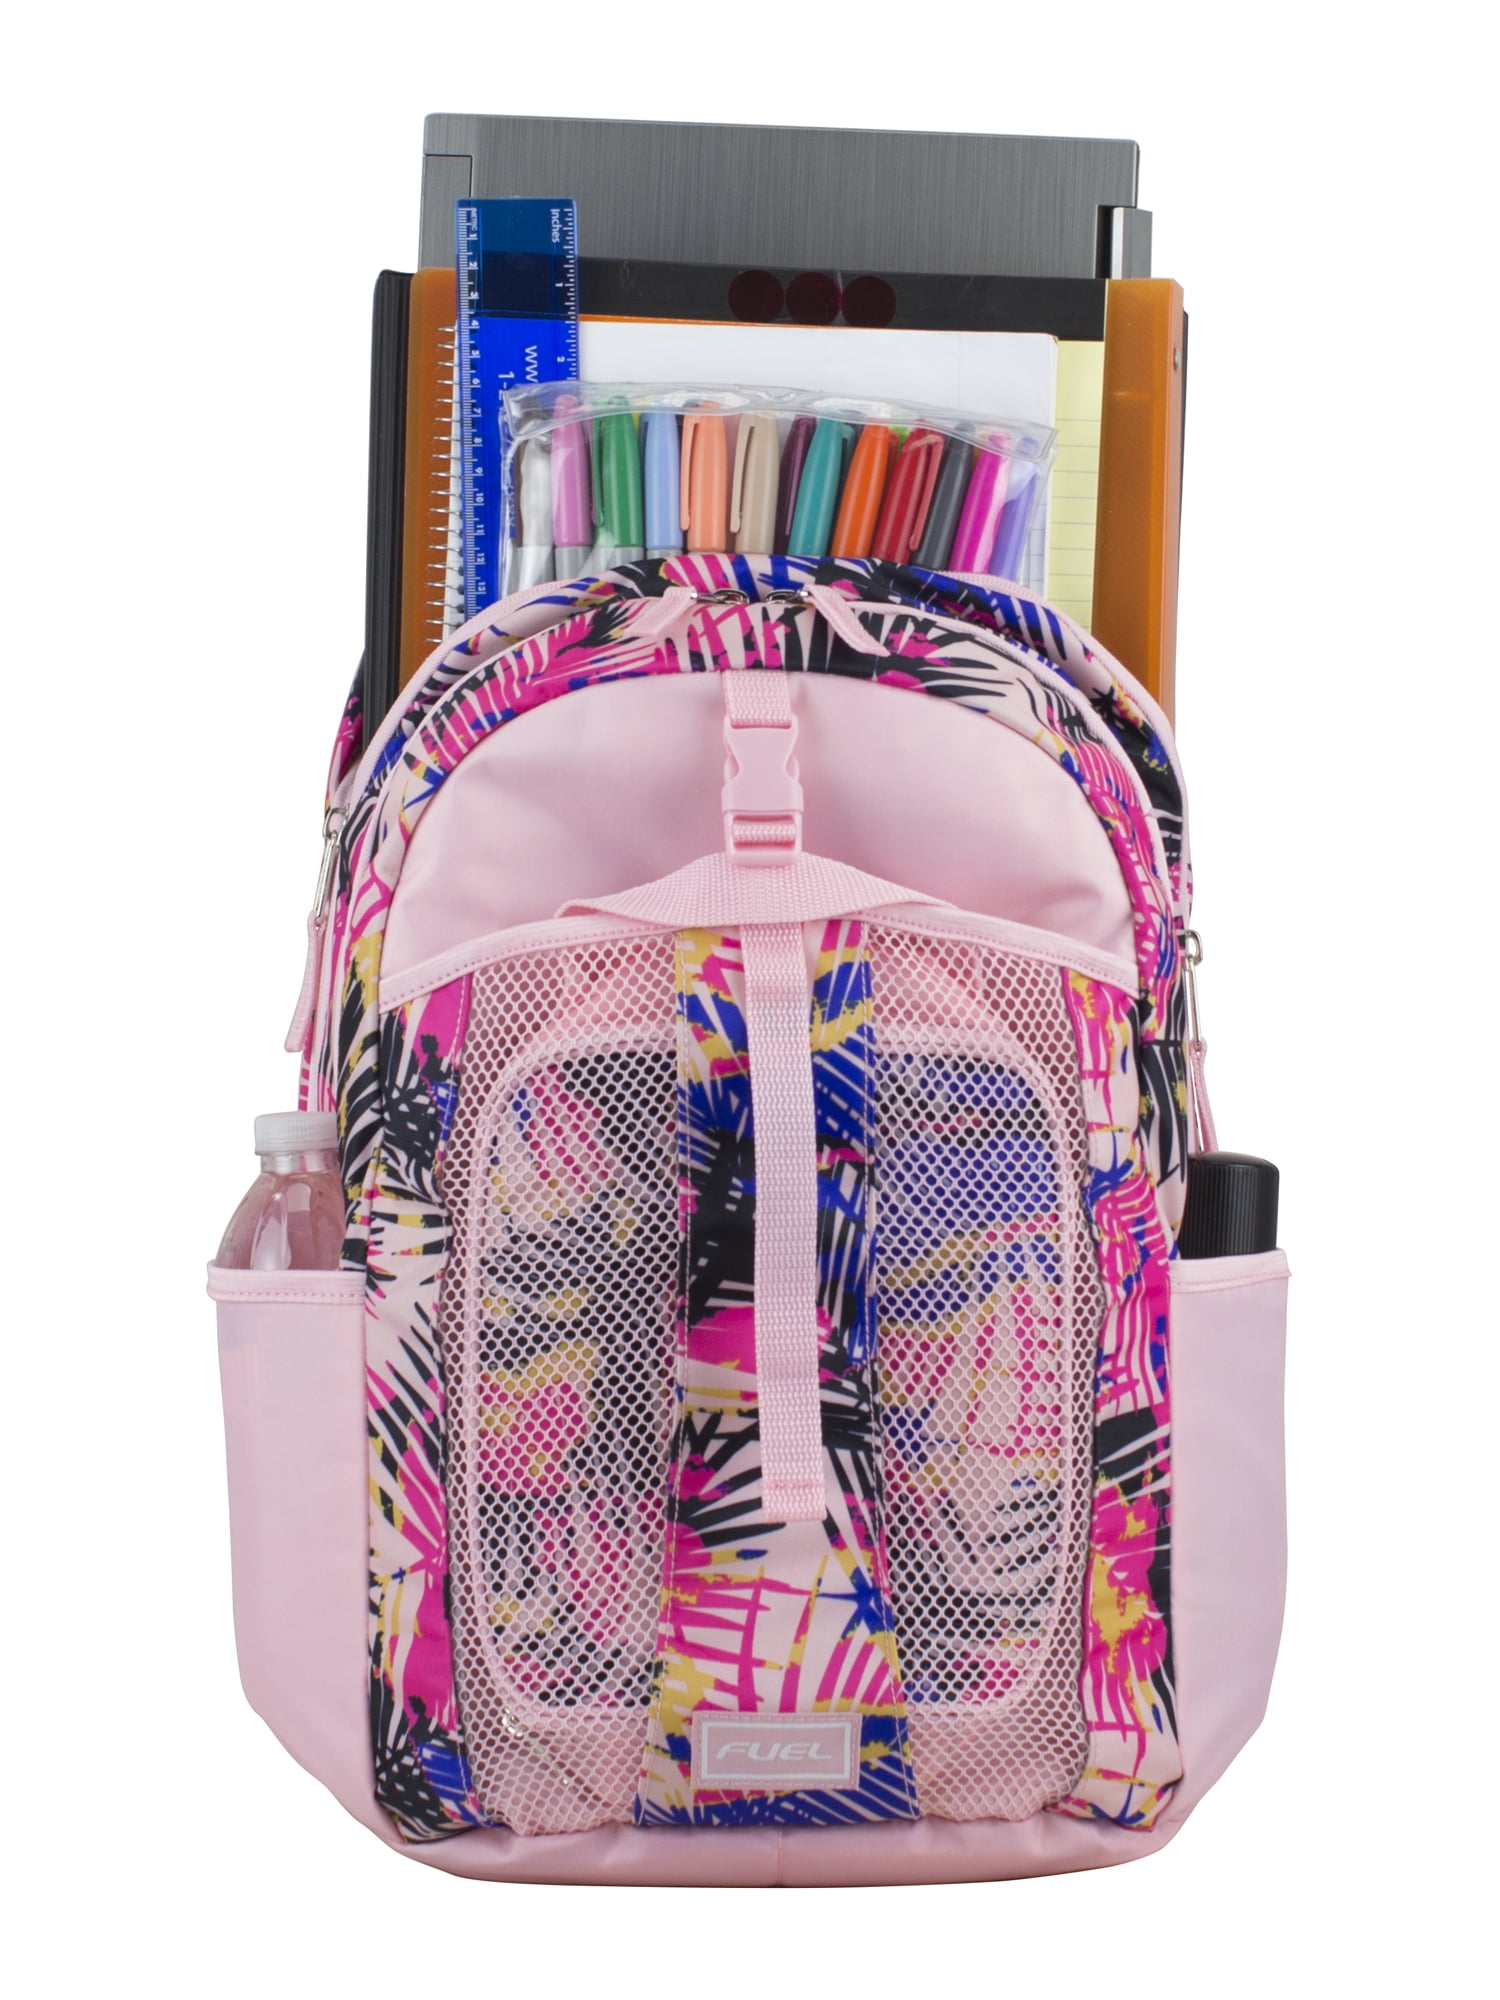 Fuel Deluxe Backpack And Lunch Bag Set Unicorn Sweets - Office Depot